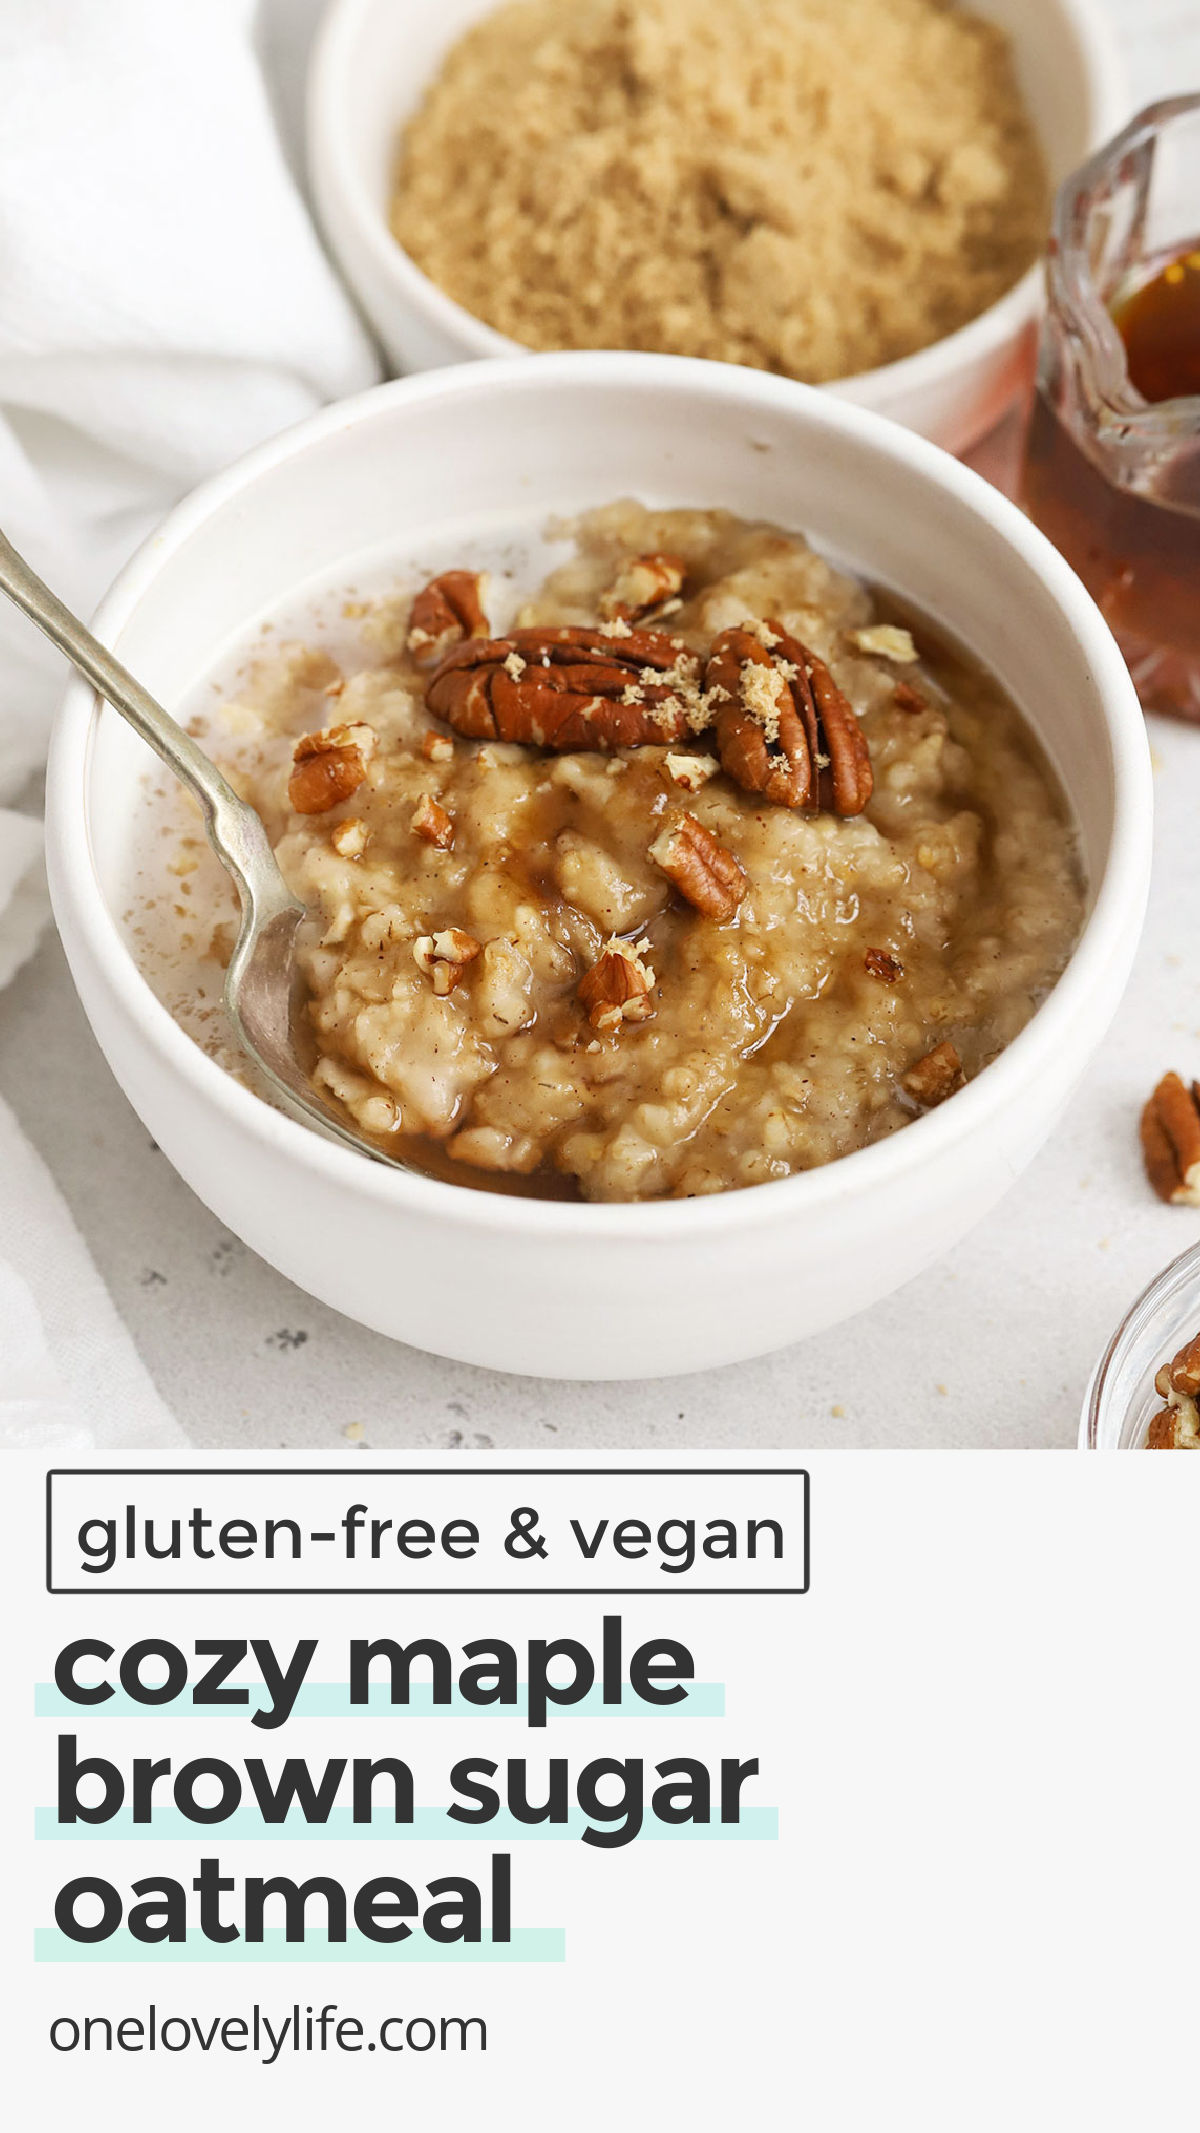 This Easy Maple Brown Sugar Oatmeal Recipe is a perfect homemade swap for oatmeal packets! It's quick, easy & SO GOOD! (Gluten-Free & Vegan, too!) // maple oatmeal / brown sugar oatmeal / maple pecan oatmeal / brown sugar pecan oatmeal / homemade oatmeal packets / easy breakfast / quick breakfast / gluten free breakfast / vegan breakfast / oatmeal bowl /